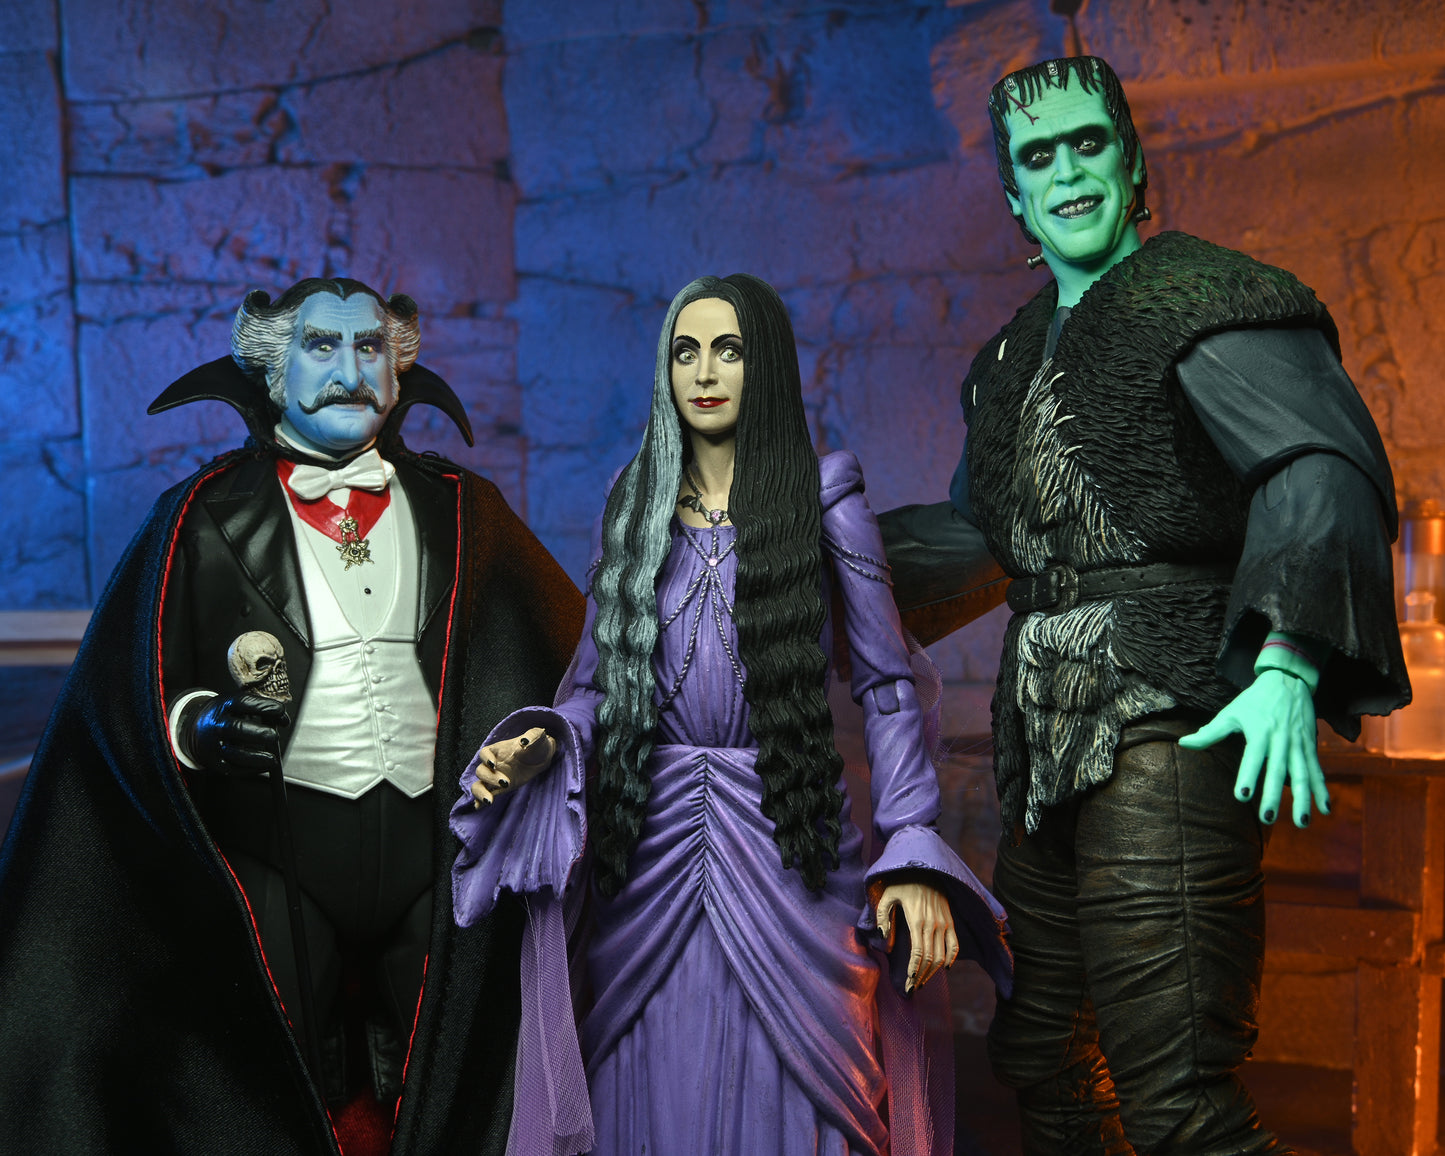 NECA: Rob Zombie’s The Munsters - Ultimate Lily Munster - 7 inch Scale Action Figure